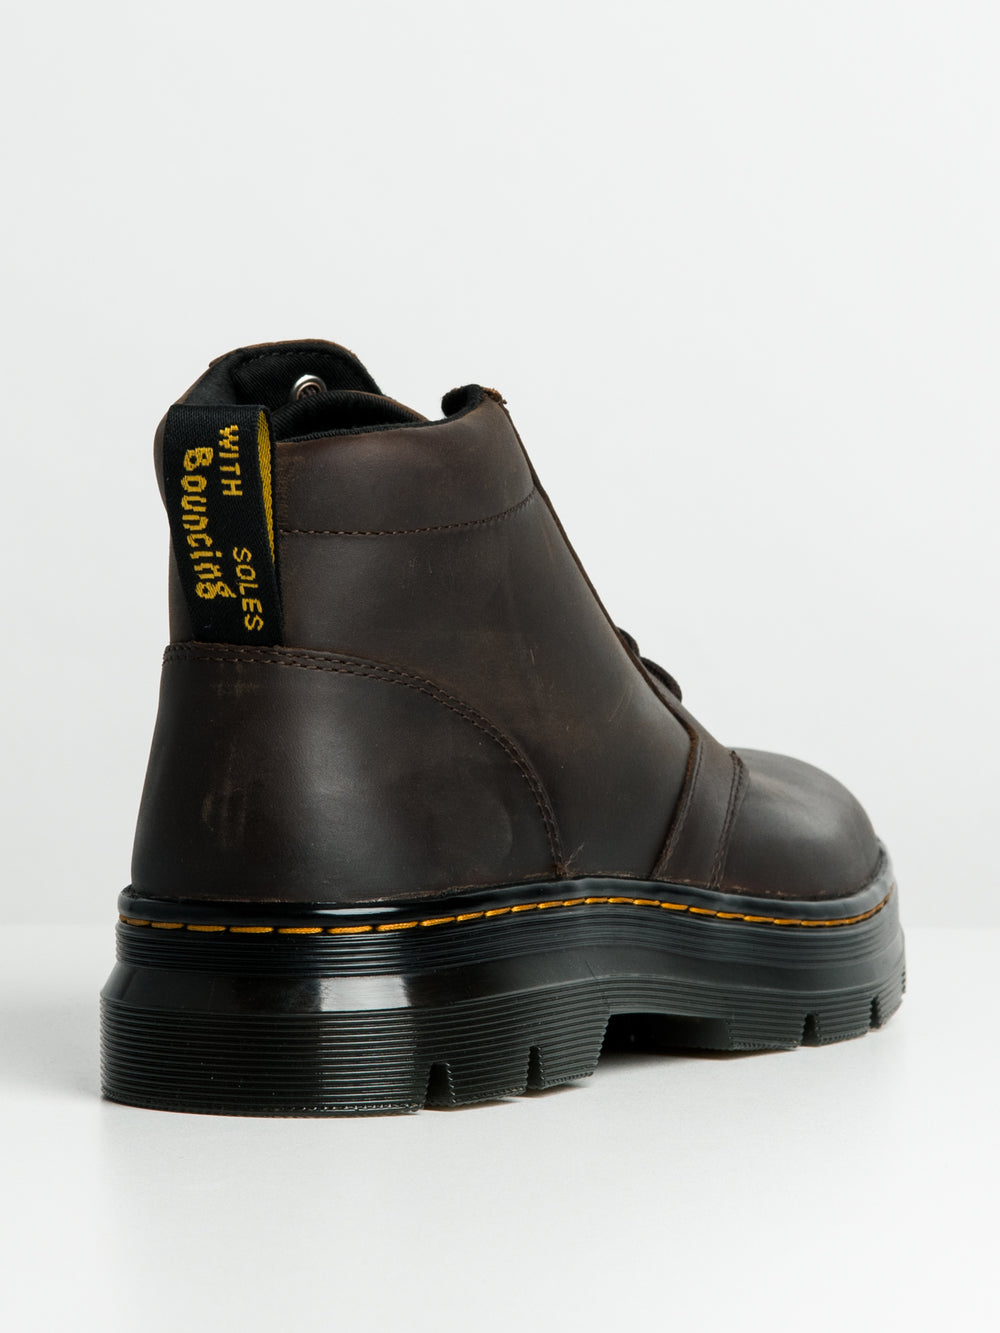 DR MARTENS BONNY LEATHER CRAZY HORSE BOOT - CLEARANCE